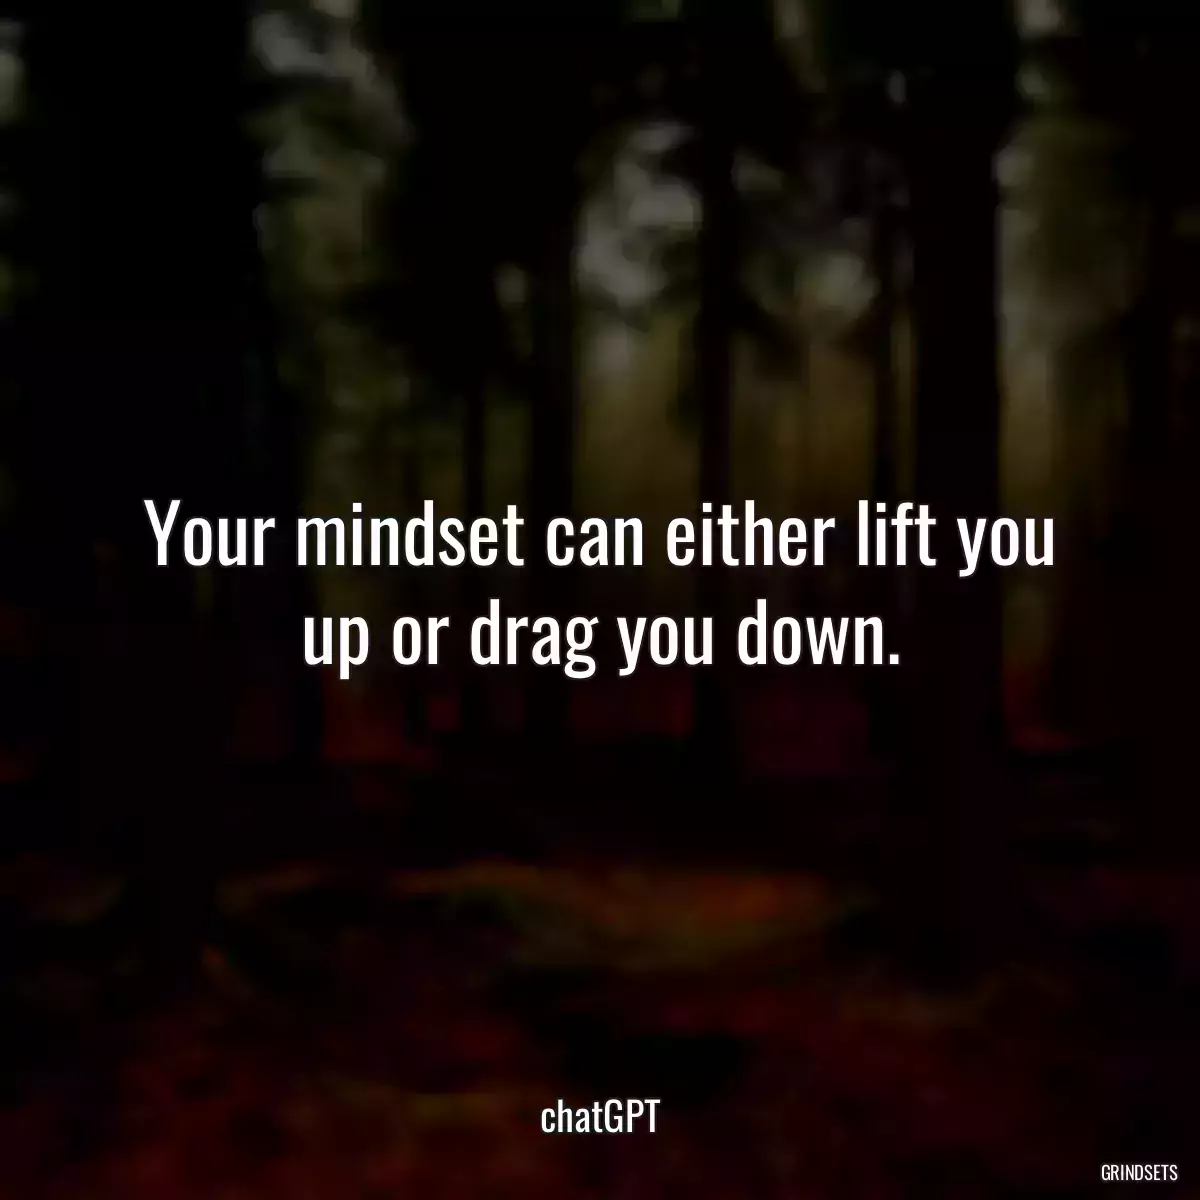 Your mindset can either lift you up or drag you down.